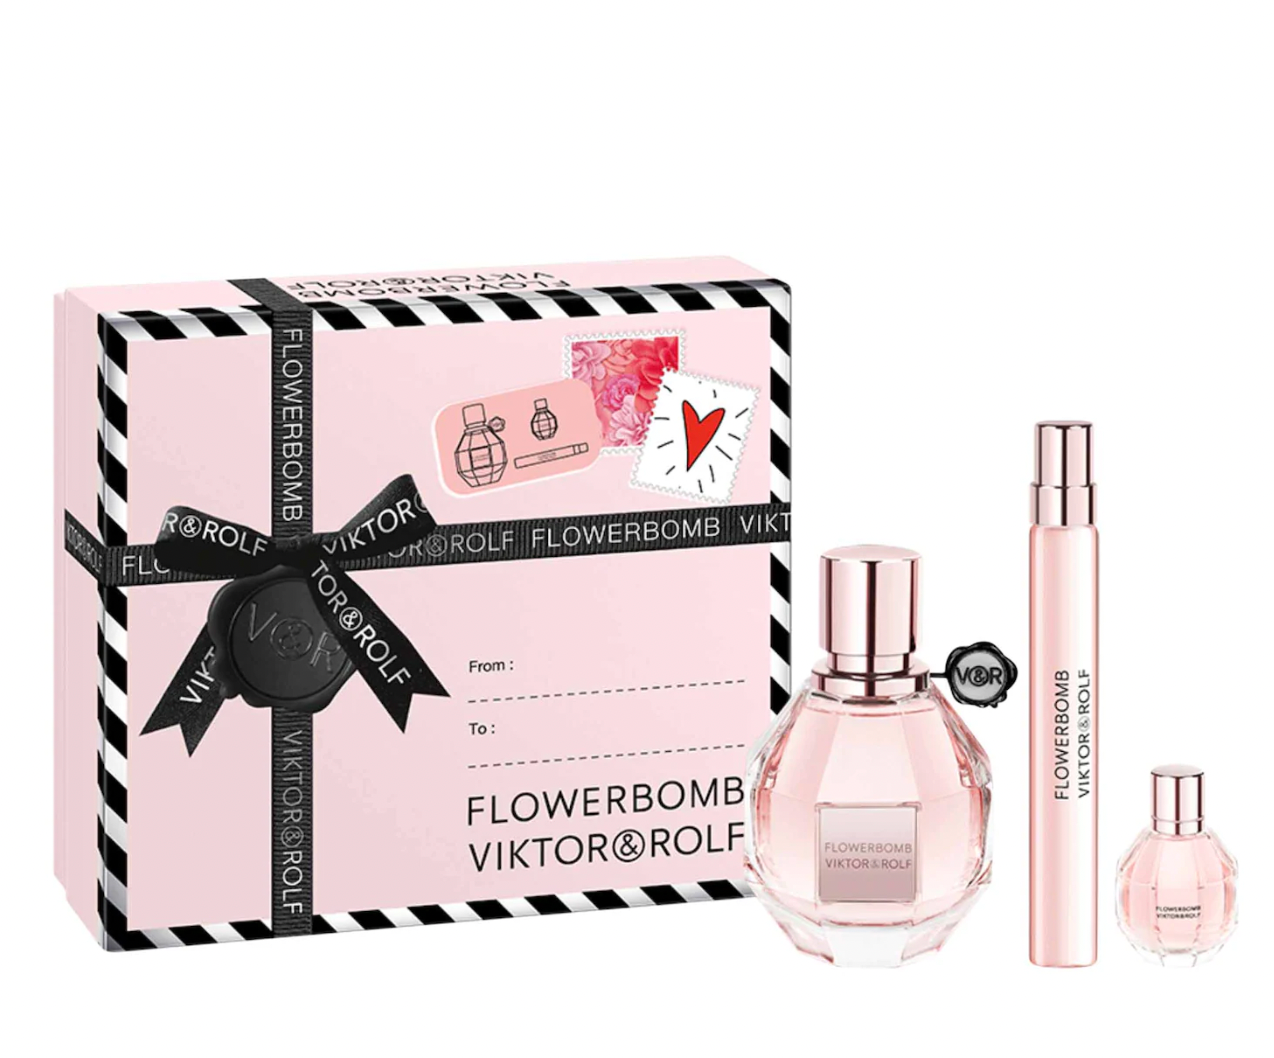 High Quality Elegant Long Lasting Fragrance 10mlx5 Dream Apogee Rose De  Vents Sable Le Jour Se Leve Perfume Kit 5 In 1 With Box Festival Gift For  Women From Fjn002, $27.63